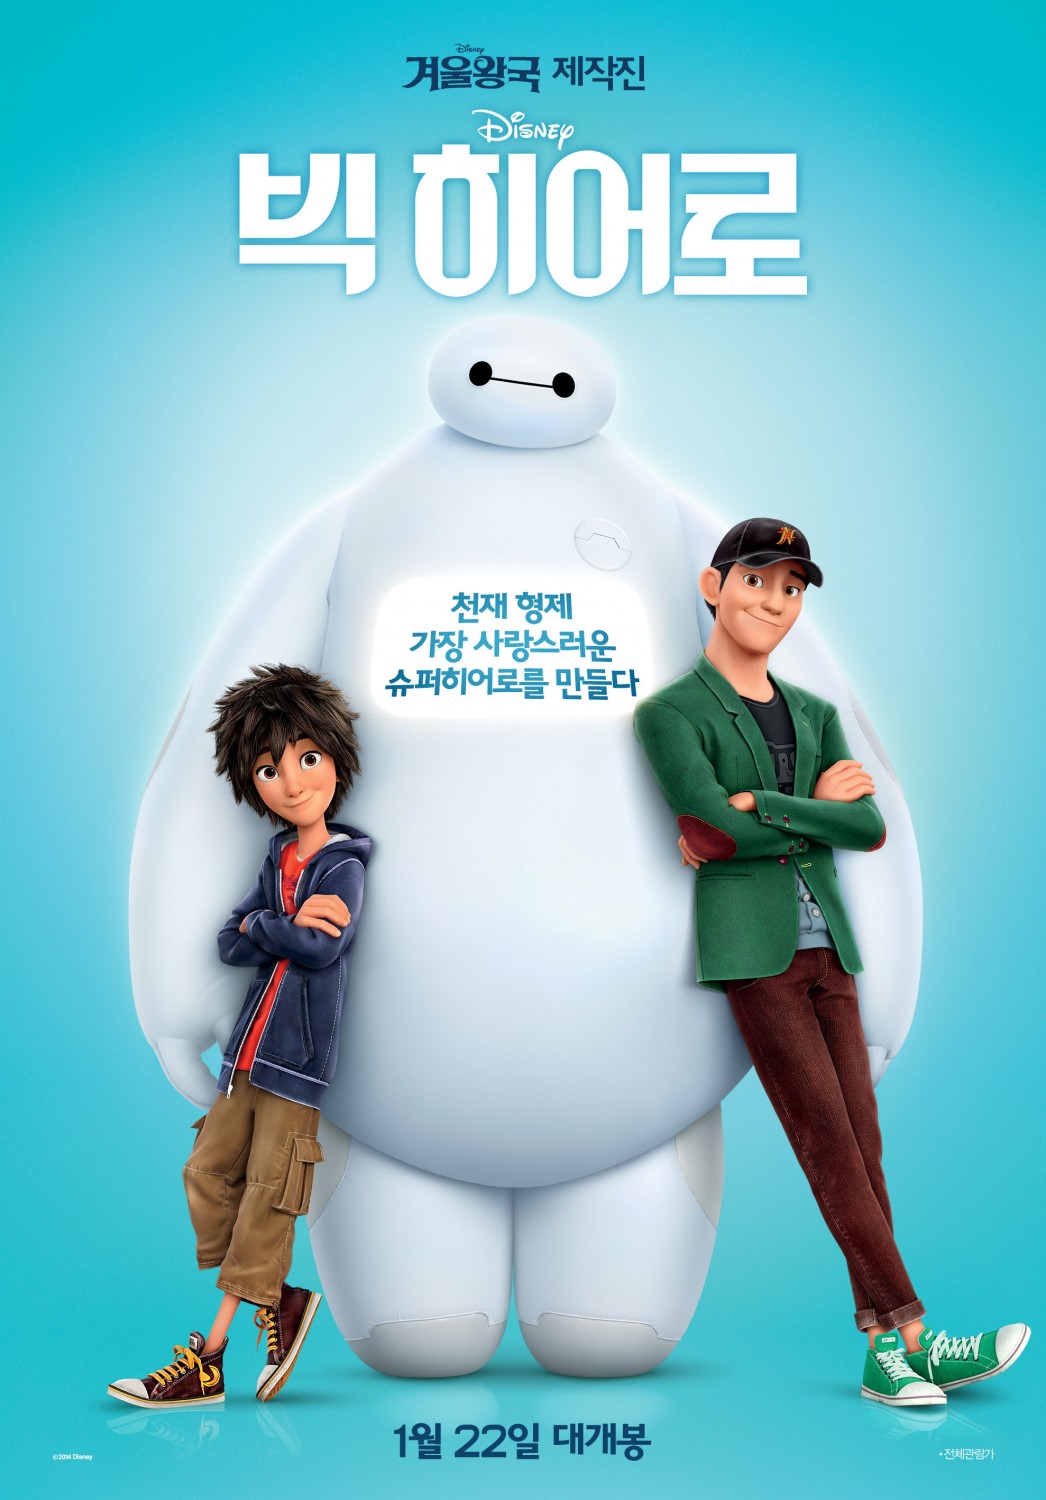 Extra Large Movie Poster Image for Big Hero 6 (#20 of 20)